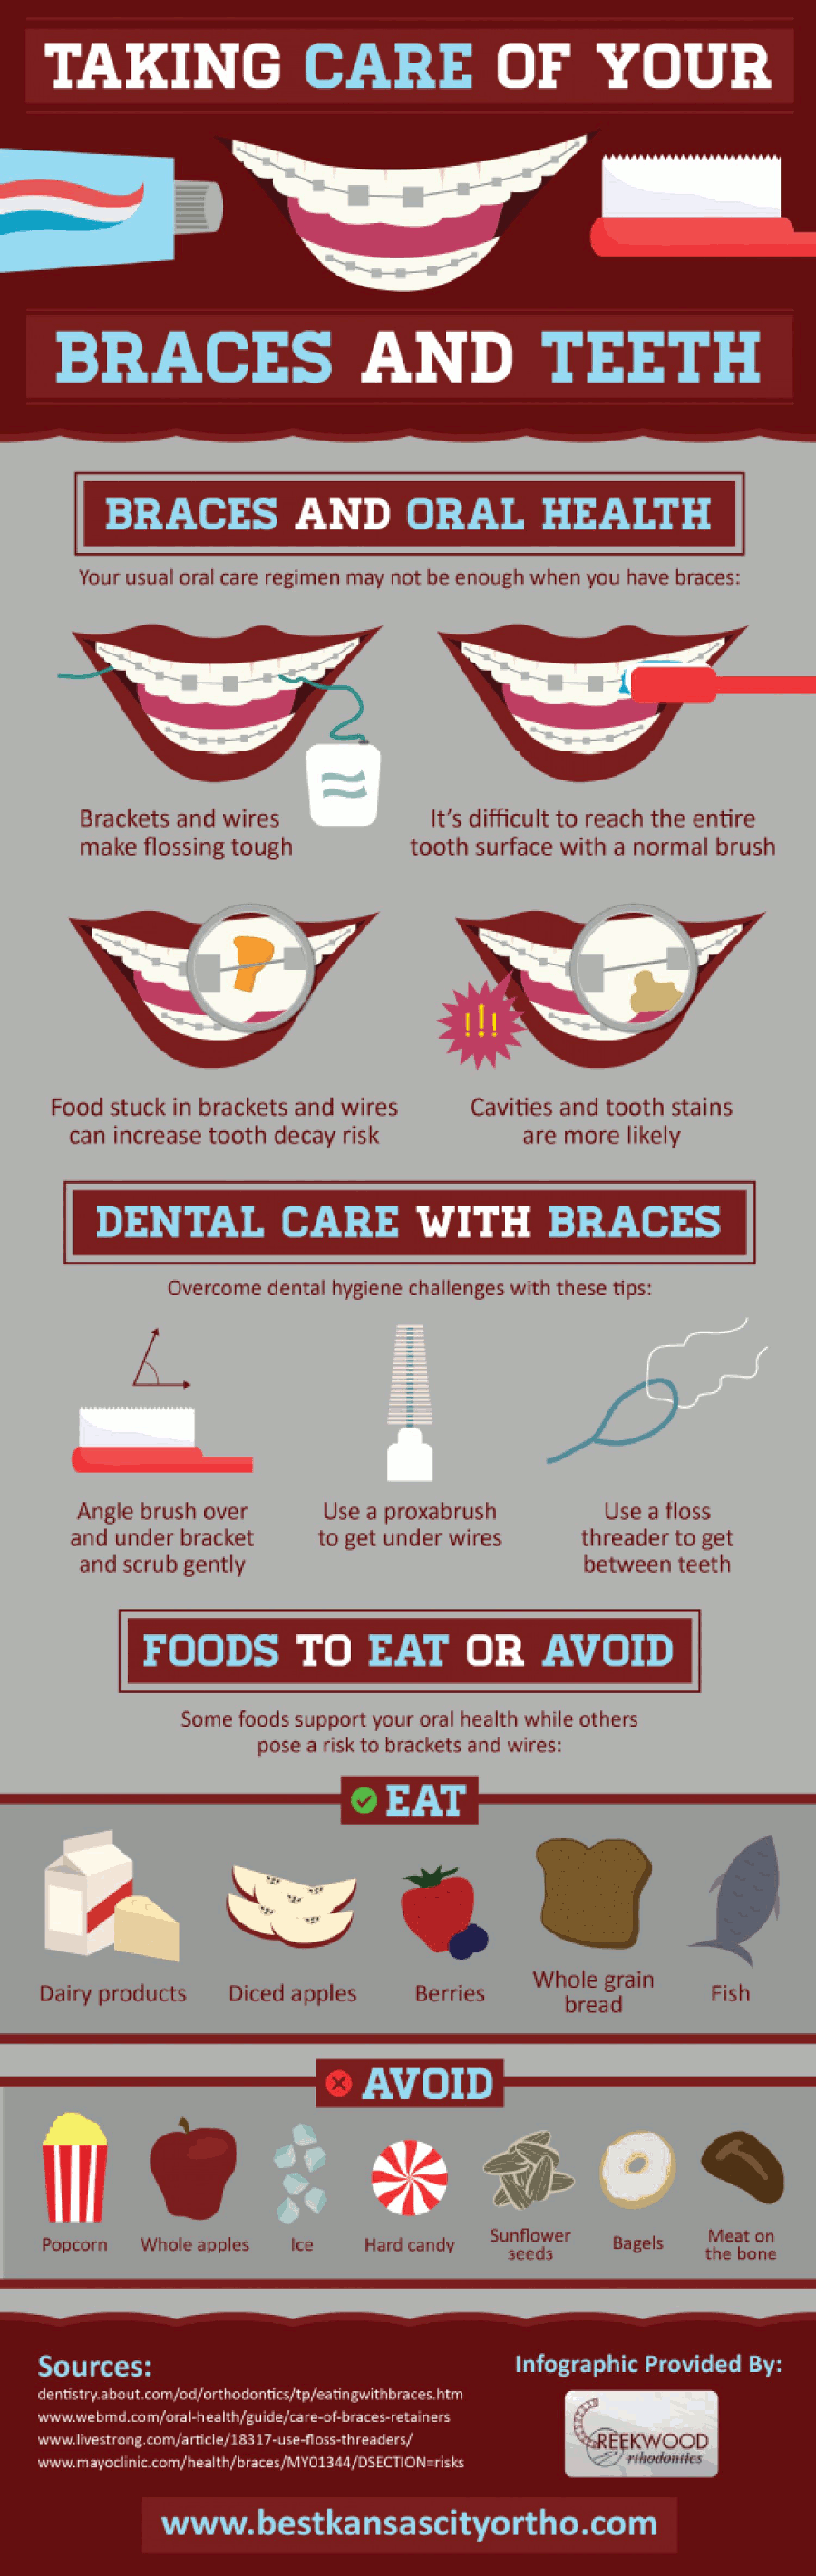 Taking Care Of Your Braces And Teeth